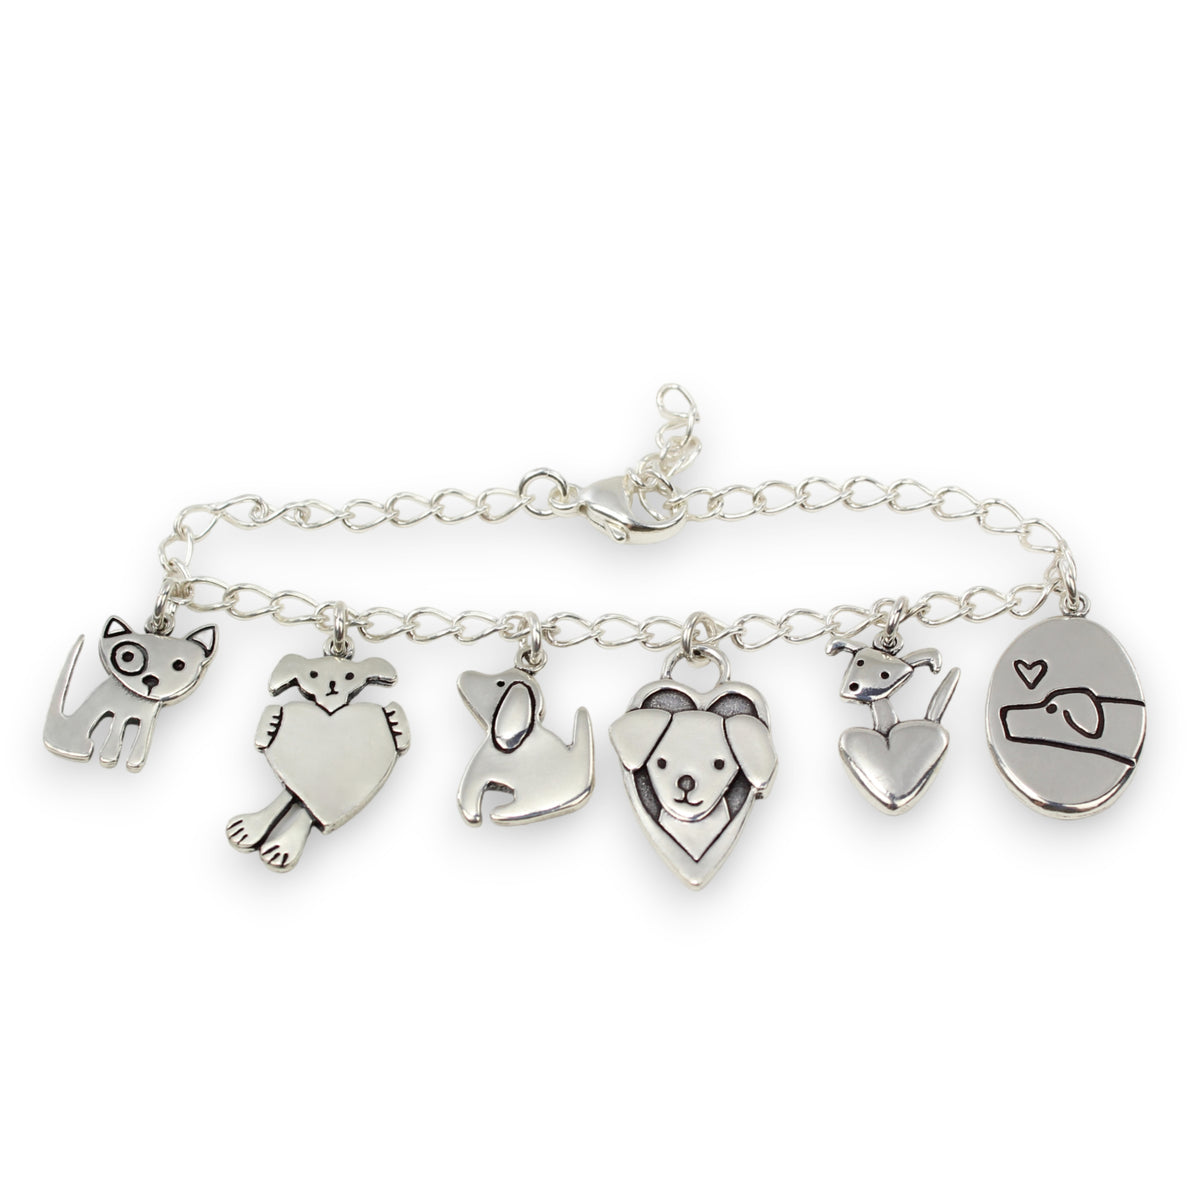 Create Your Own Charm Bracelet 6 1/2 Inches - 7 1/2 Inches